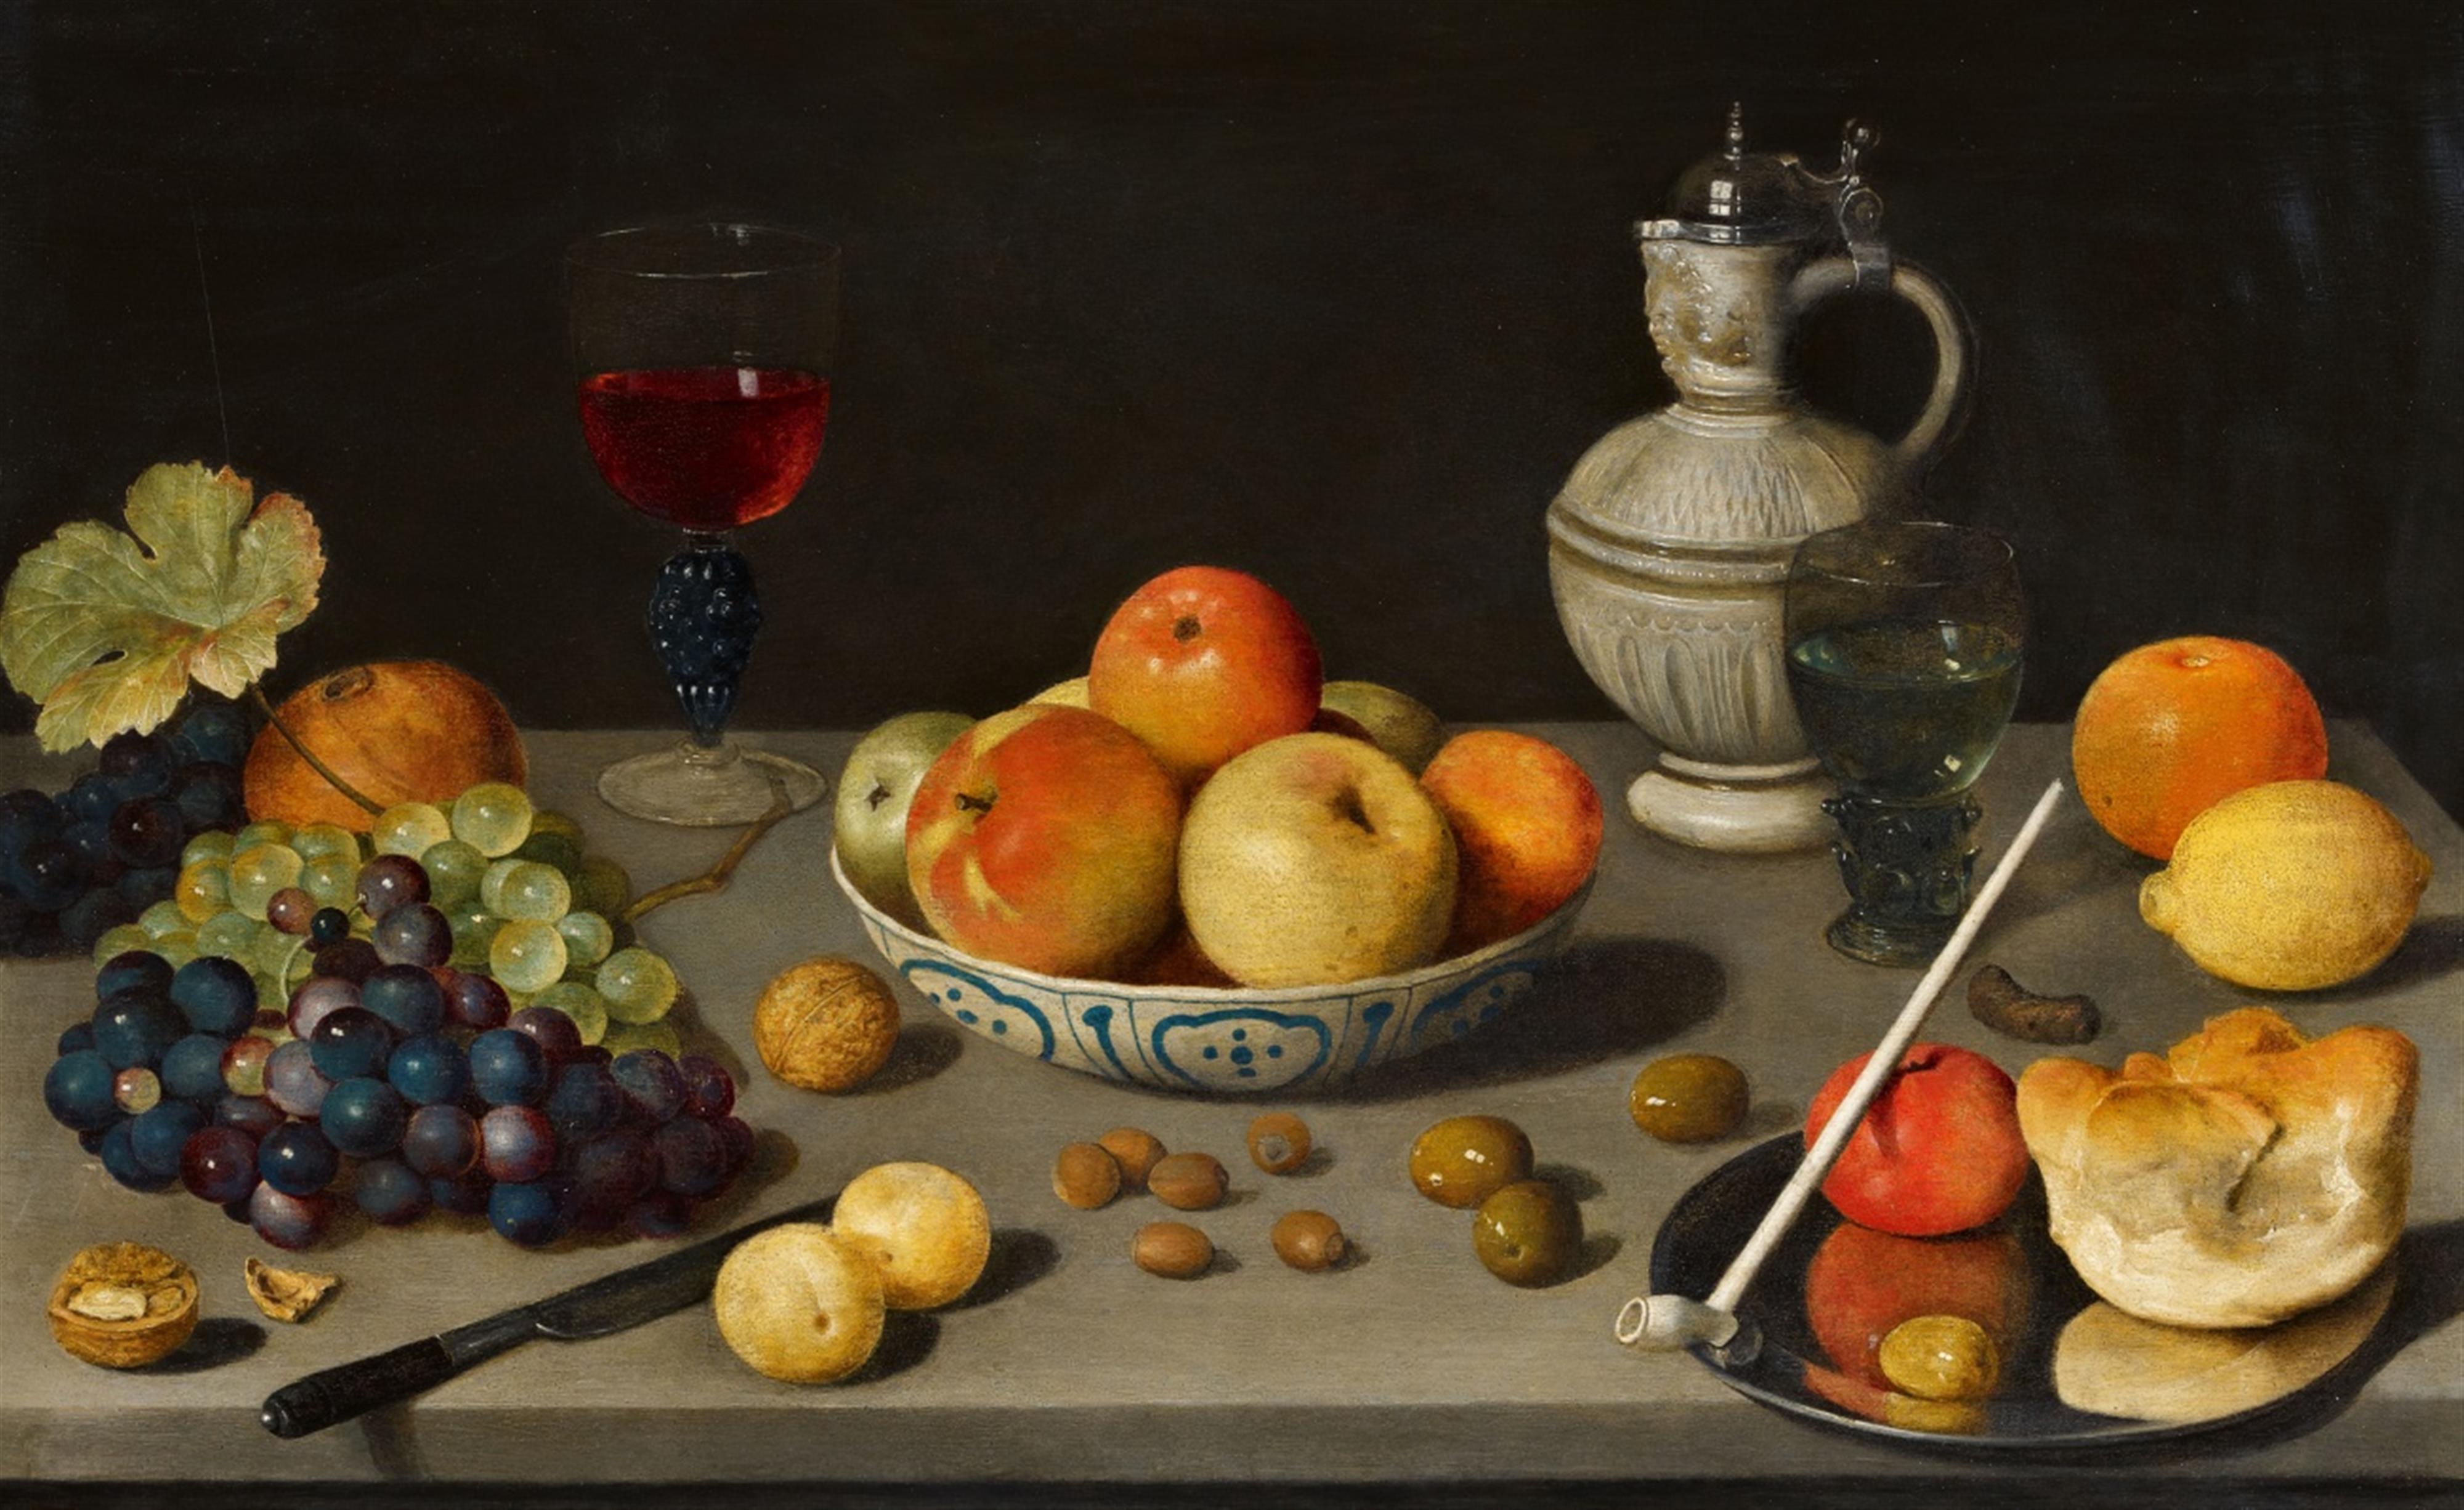 Floris van Dyck - Still Life with Grapes, Apples, Nuts, Olives, Wine Glasses, and a Siegburg Pitcher - image-1